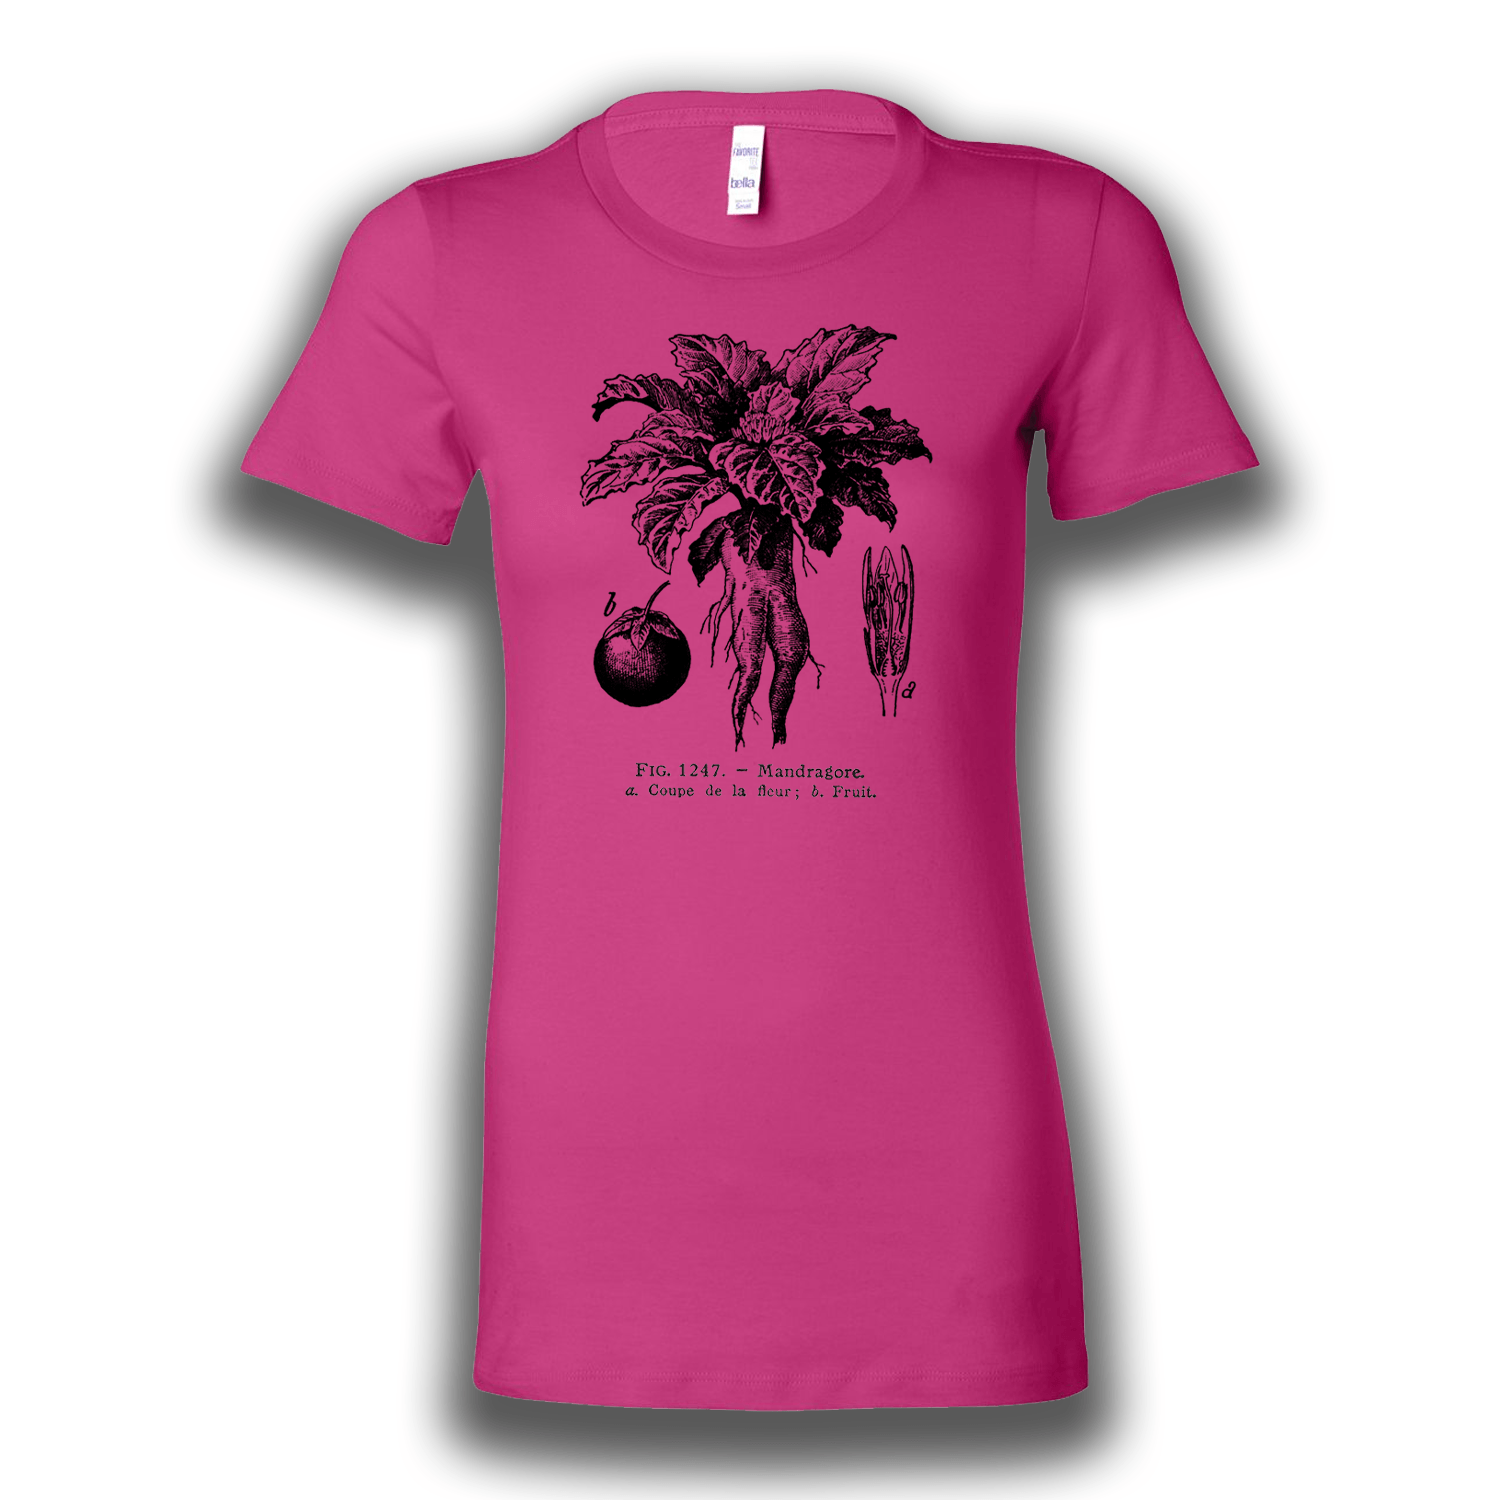 A bright pink women's shirt featuring vintage artwork, a botanical plate of the Mandrake root and plant, printed in black.